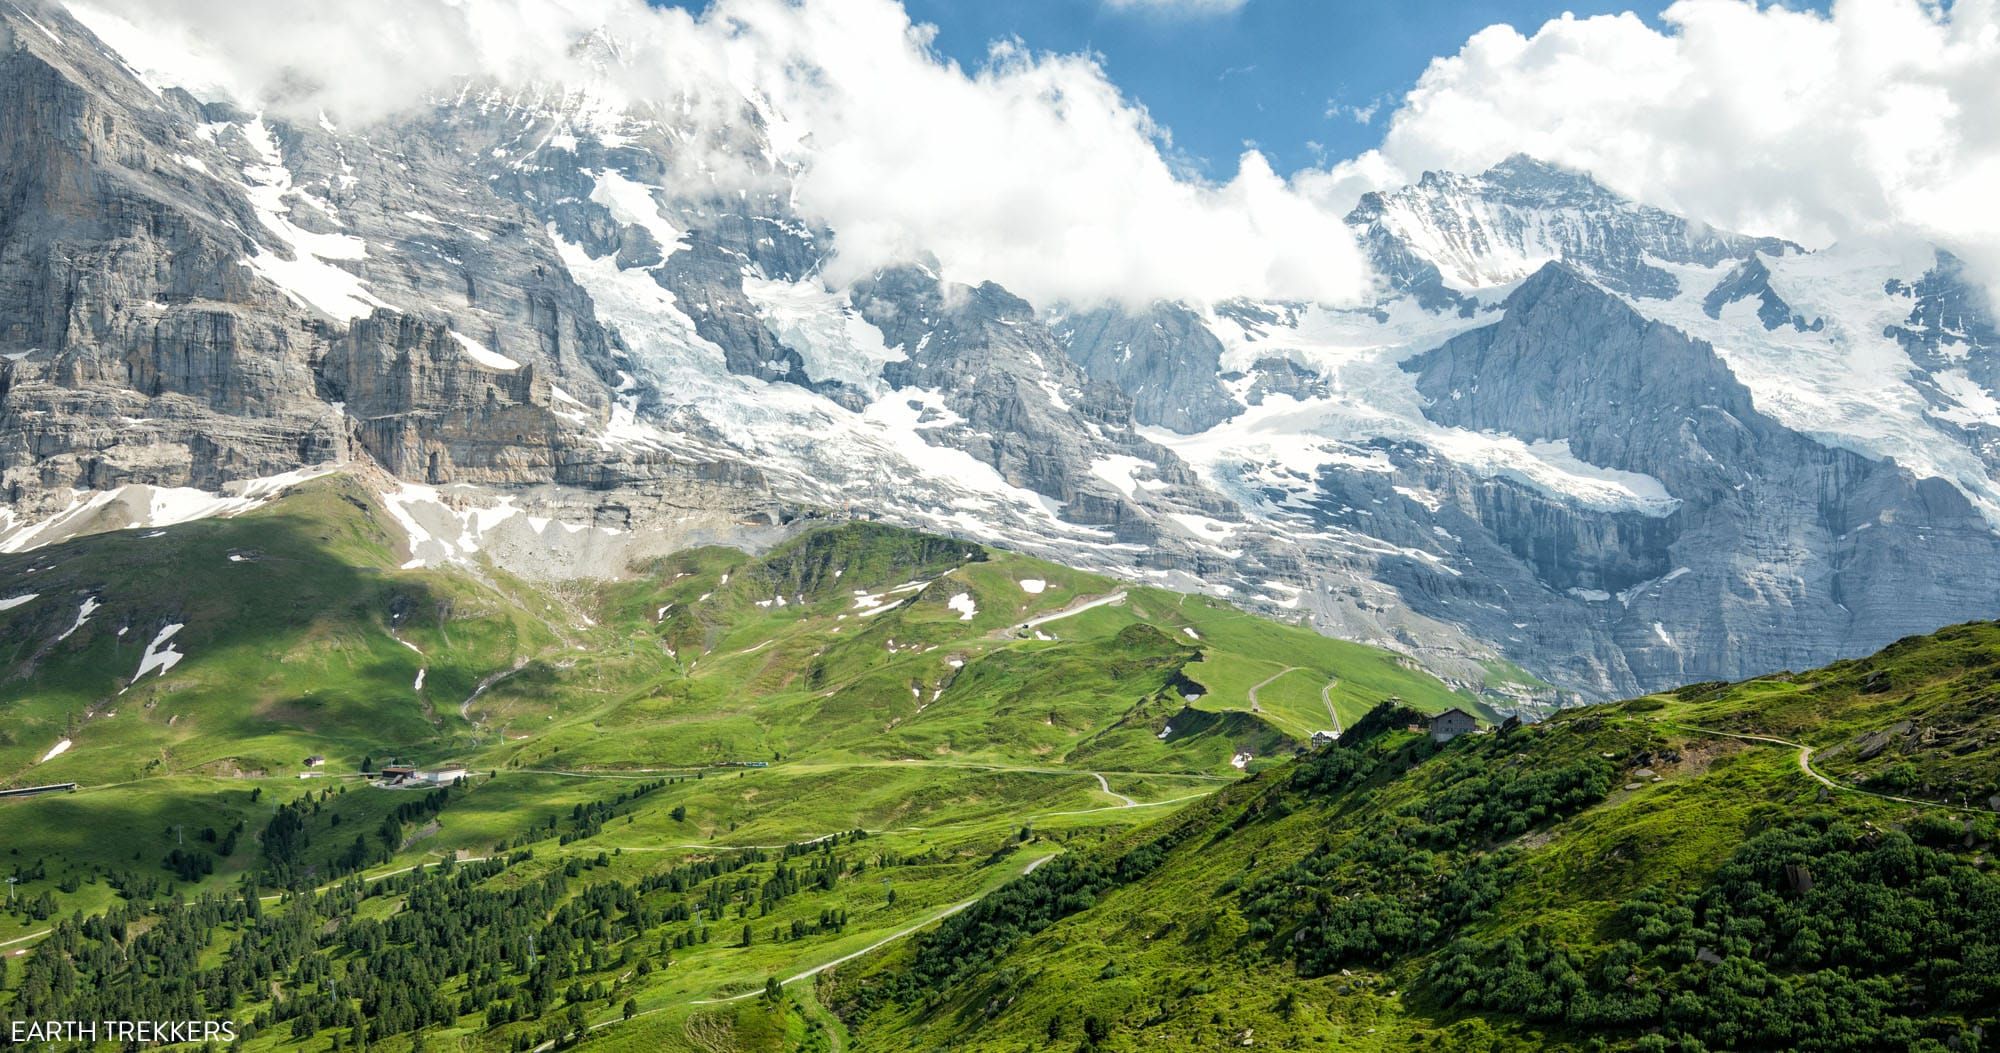 Featured image for “One Day in the Jungfrau Region: Jungfraujoch & the Eiger Trail”